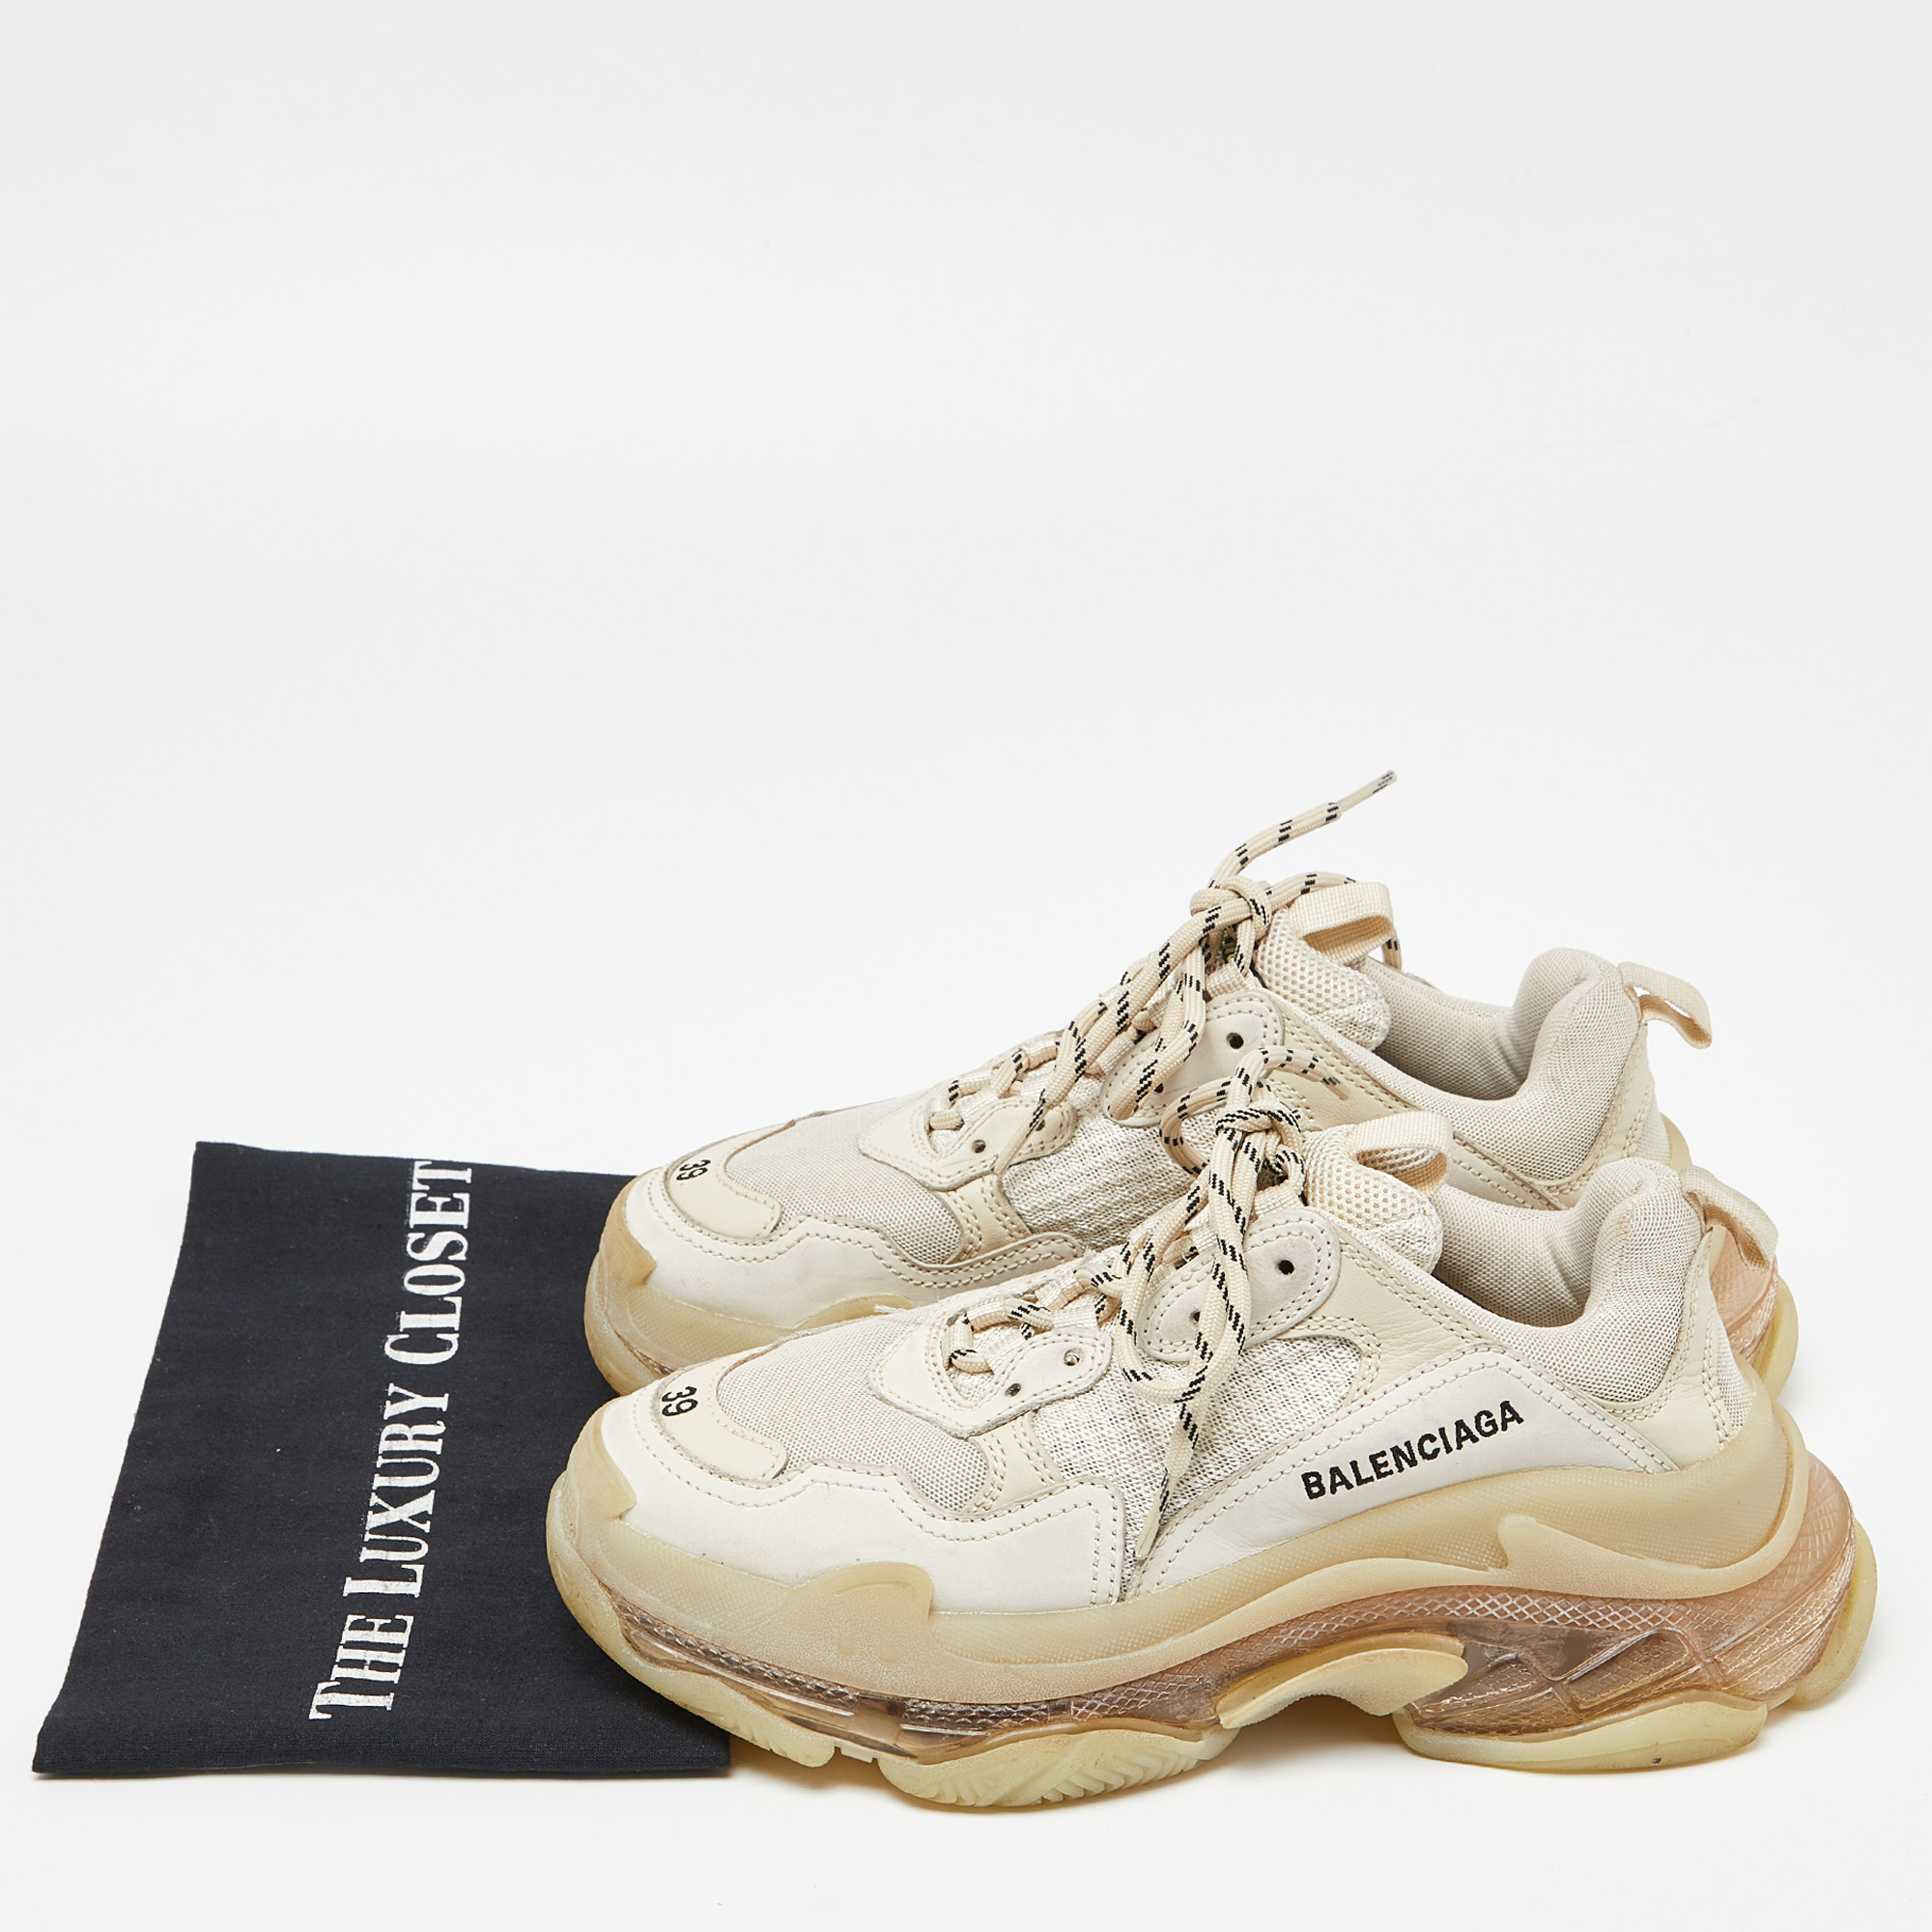 Balenciaga Cream Leather And Mesh Triple S Clear Sole Sneakers Size 39